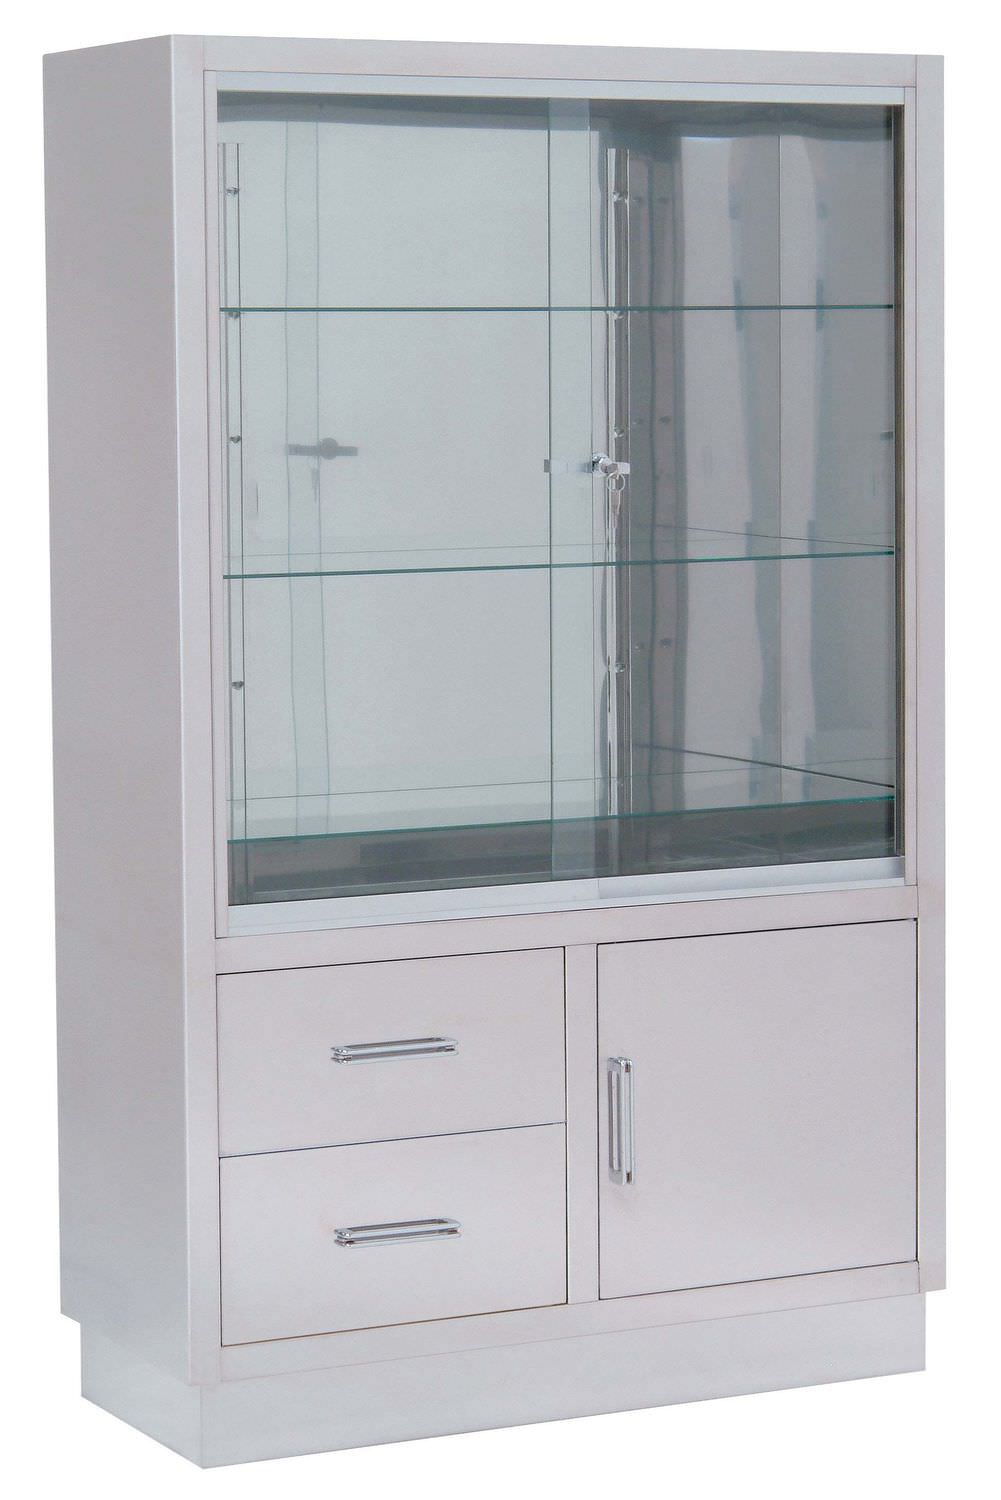 Medical instrument cabinet with drawer 24157 Inmoclinc